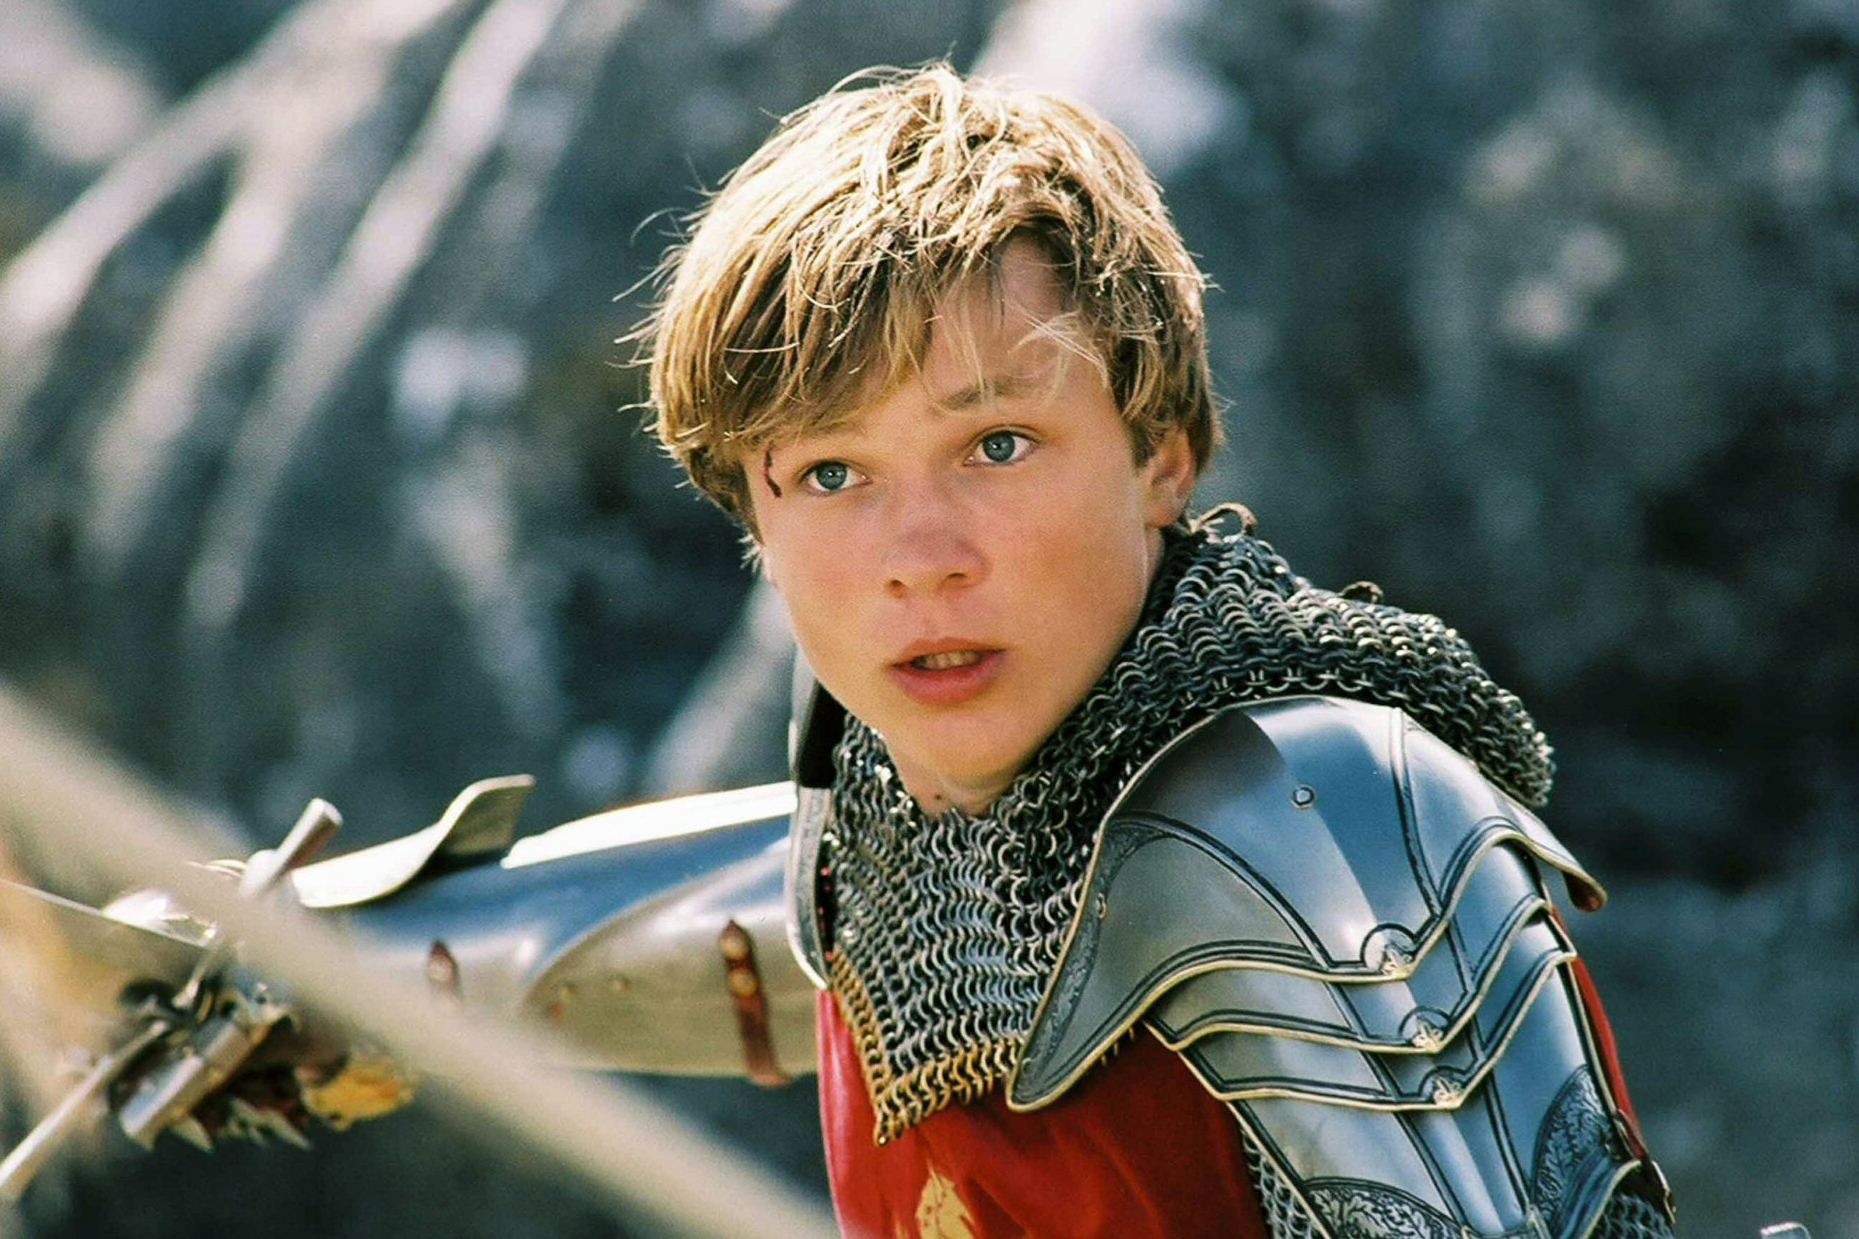 William Moseley as Peter Pevensie in The Chronicles of Narnia: The Lion, the Witch and the Wardrobe.